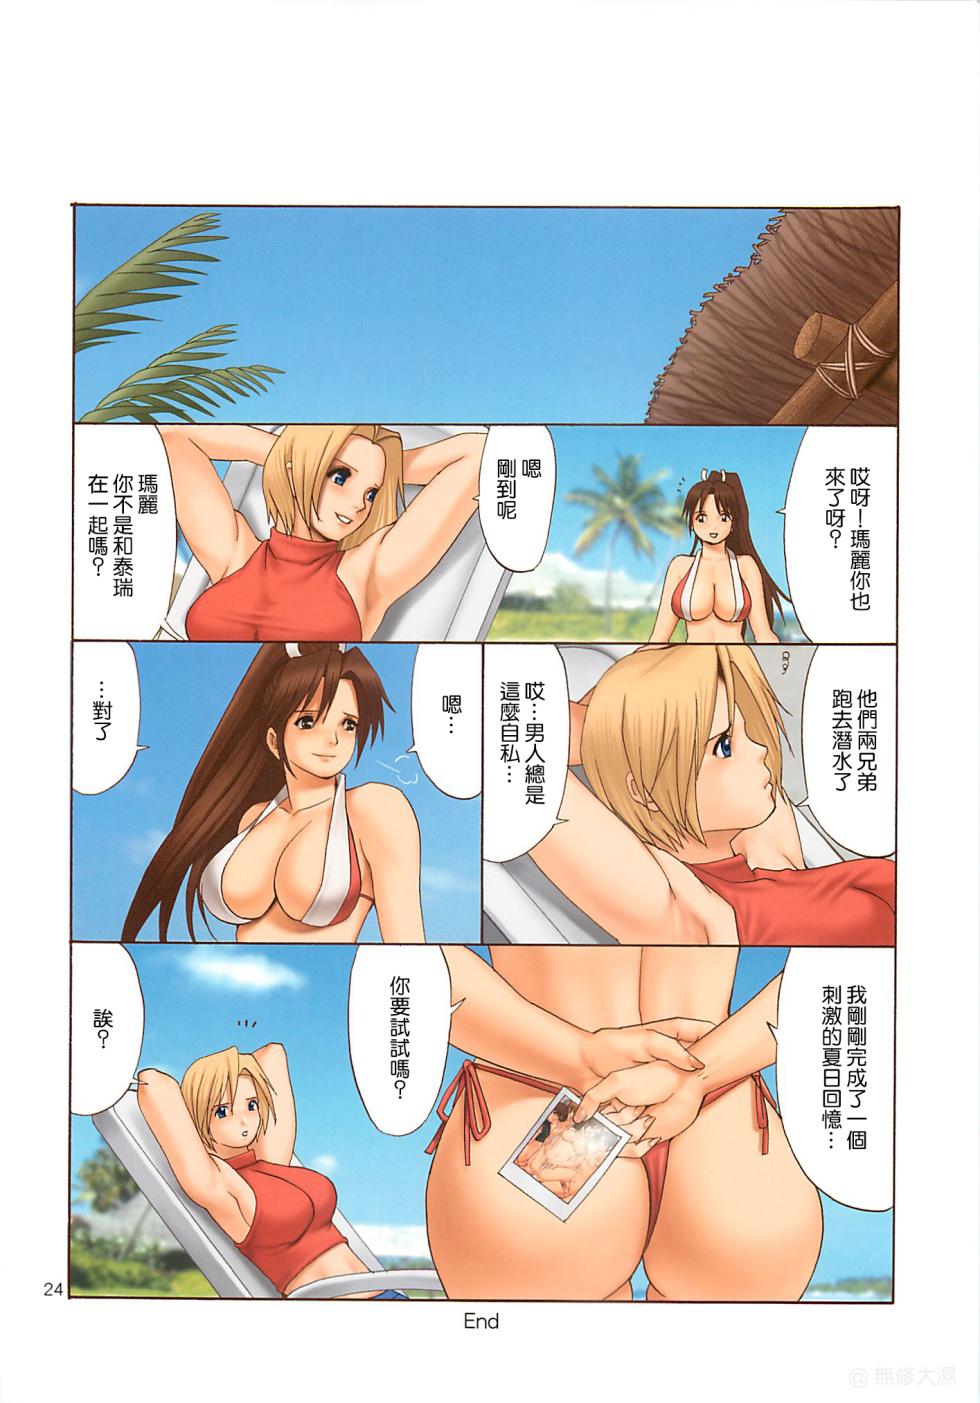 (C66) [Saigado] The Yuri & Friends Full Color 7 (King of Fighters) [Chinese] [Decensored] [無修大濕] - Page 23